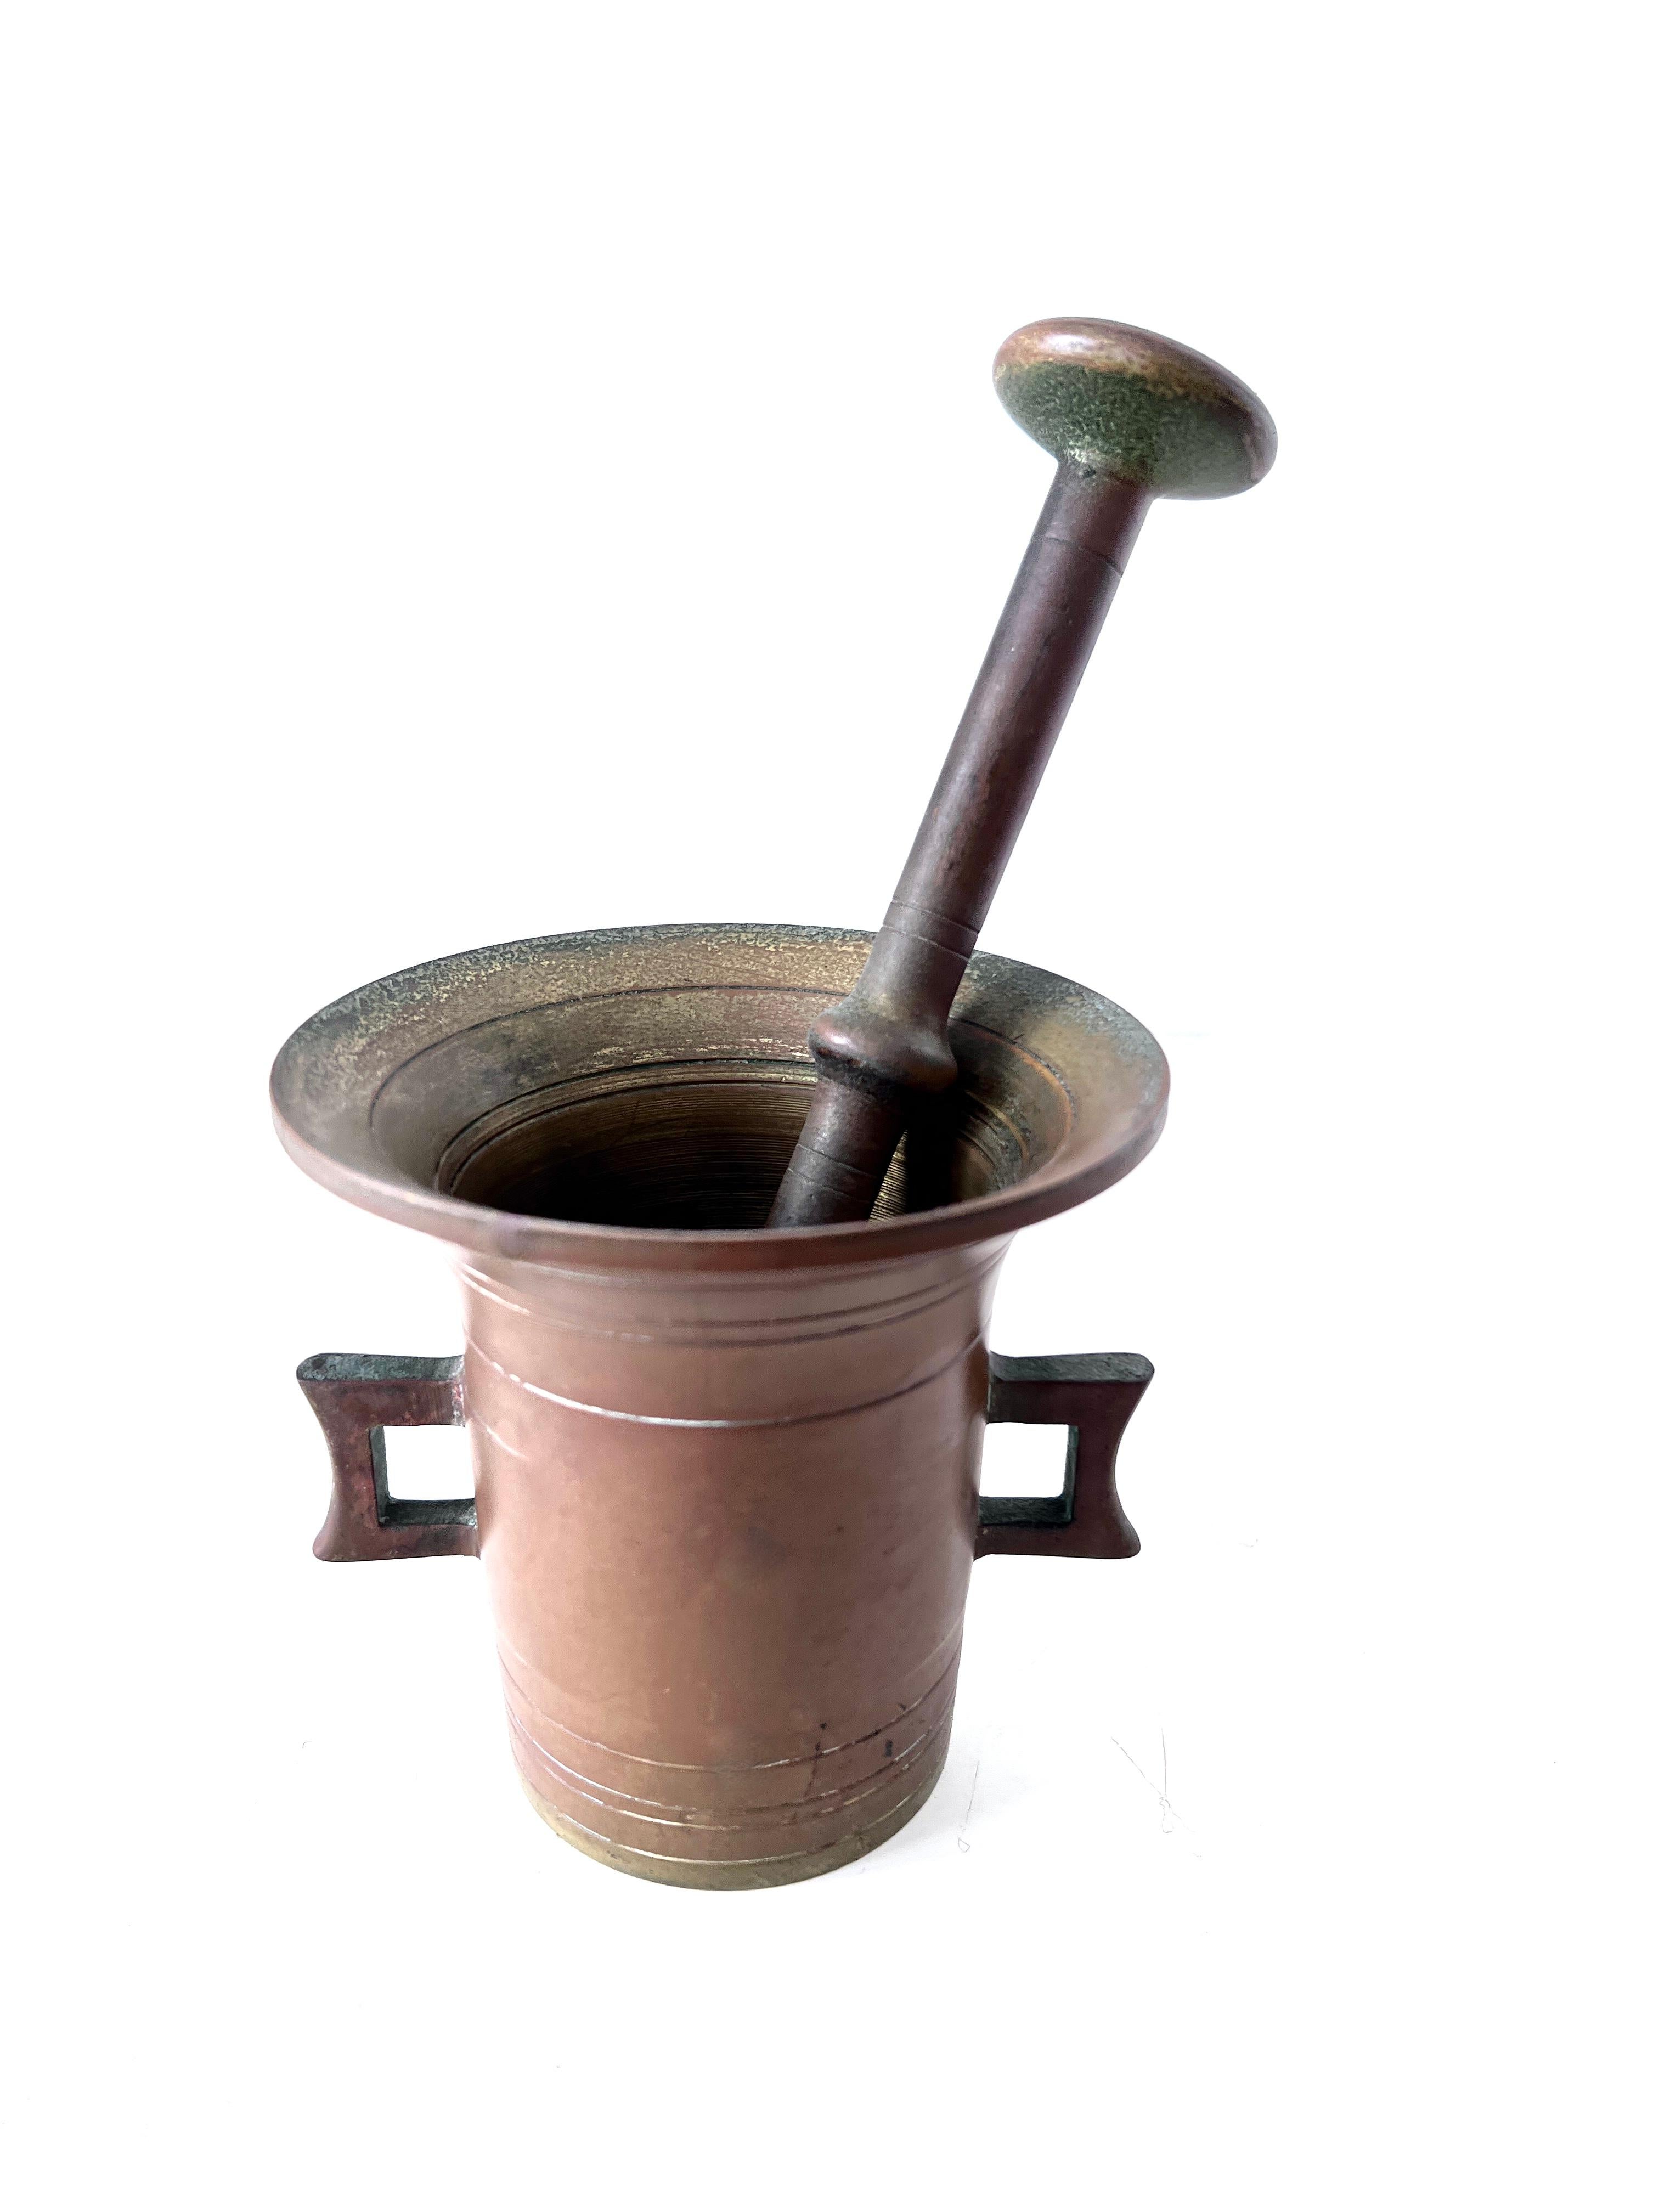 A vintage Mortar and Pestle of brass.  The piece is quite patinated, but could easily be brought to a full gleaming shine.

Mortars and pestles ahve been around for many years = to crush herbs and spices and also to work with patients who need